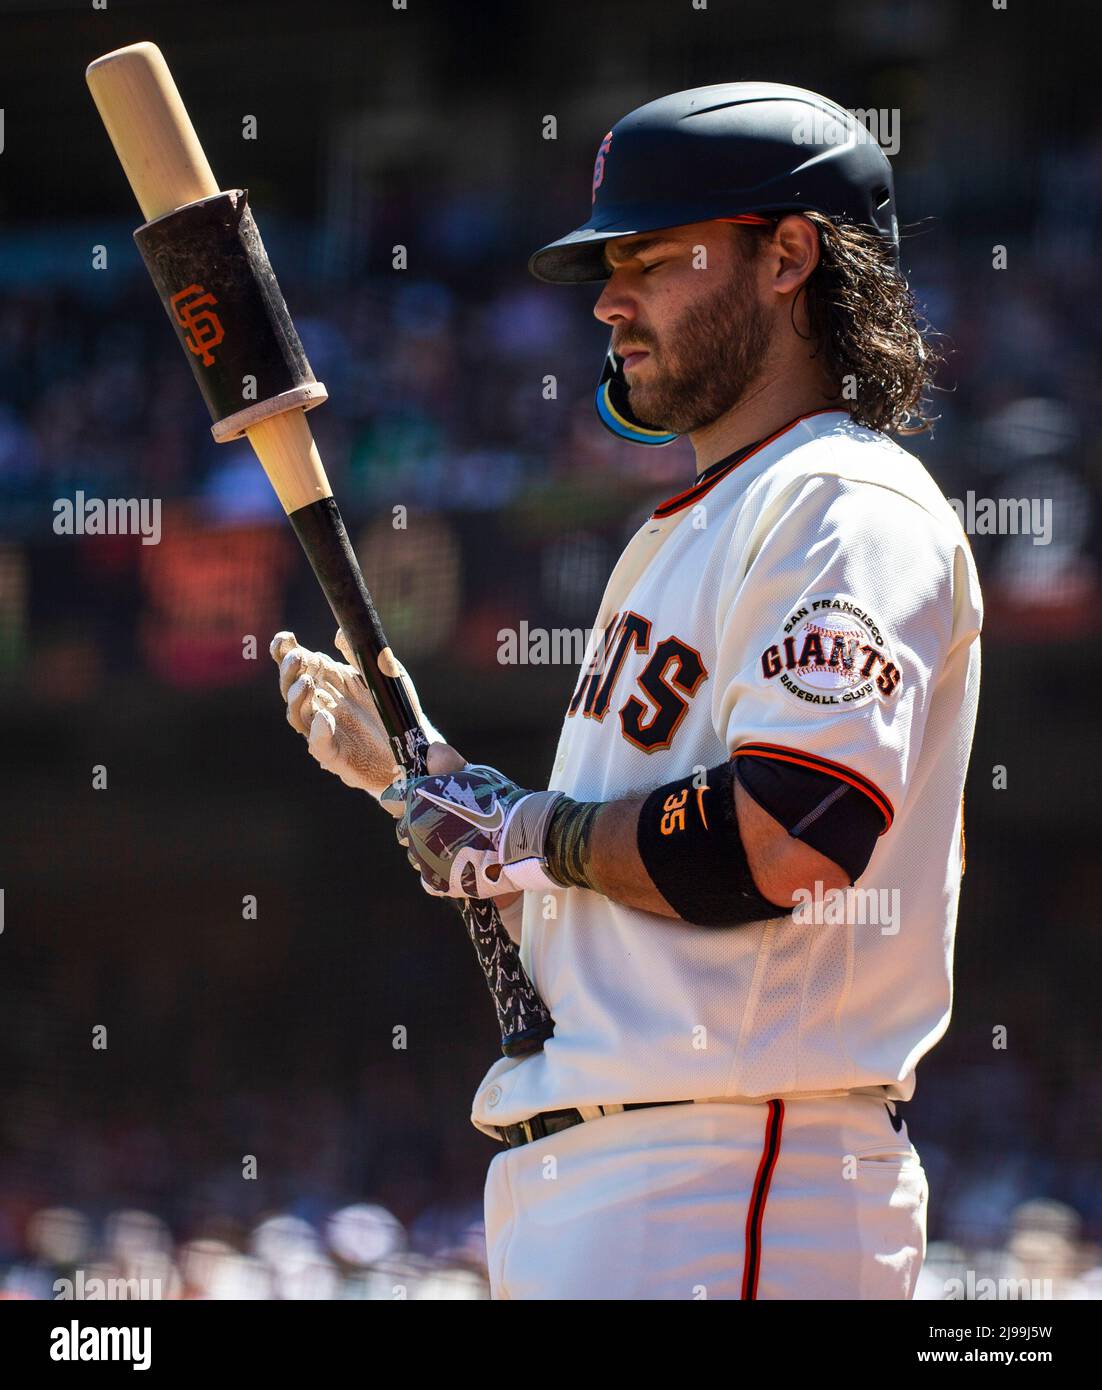 May 21 2022 San Francisco CA, U.S.A. San Francisco shortstop Brandon  Crawford (35) up at bat during MLB game between the San Diego Padres and  the San Francisco Giants in the fourth